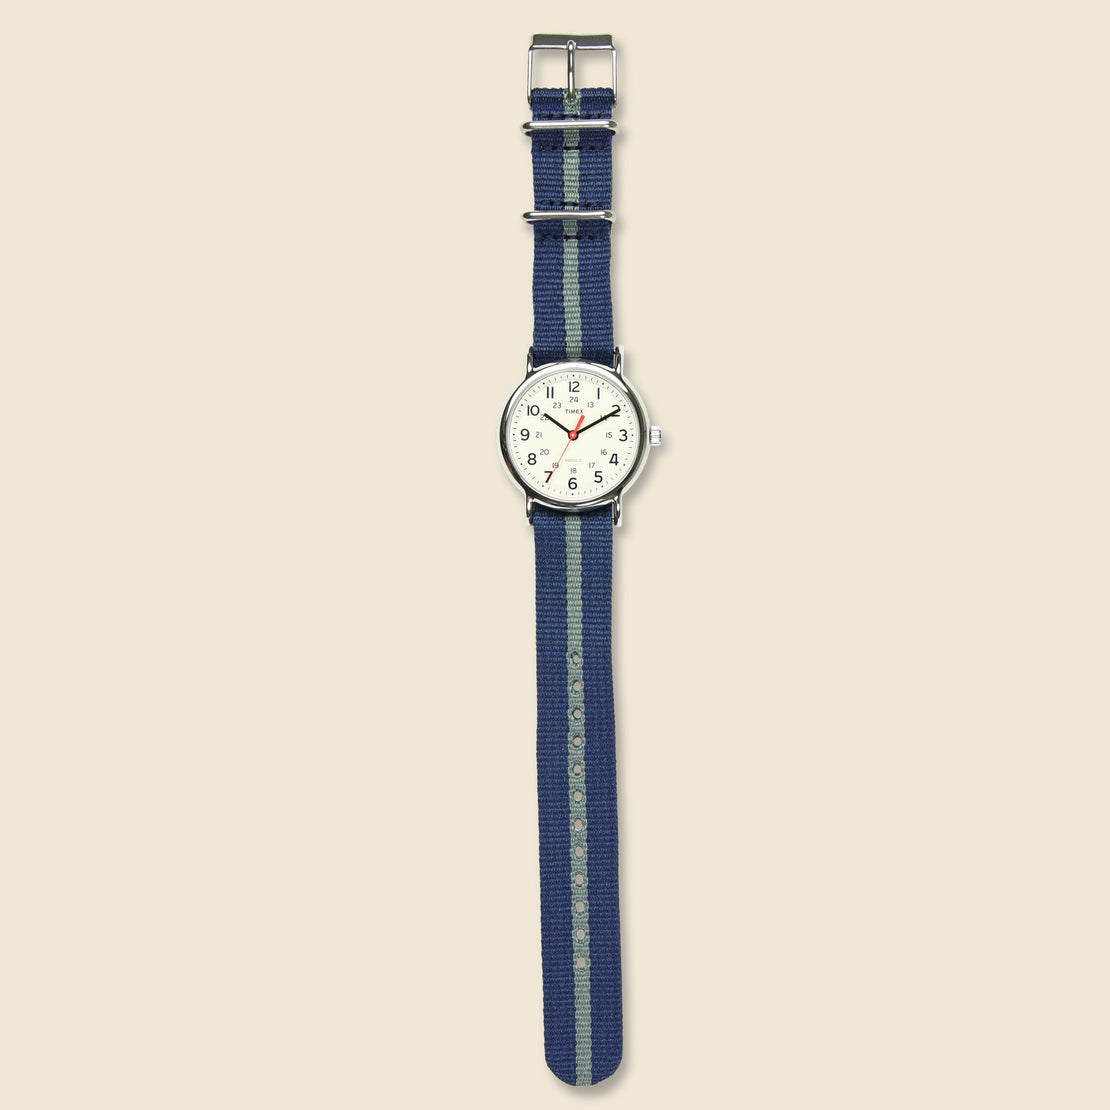 Weekender Nylon Strap Watch 38mm - Blue/White - Timex - STAG Provisions - Accessories - Watches